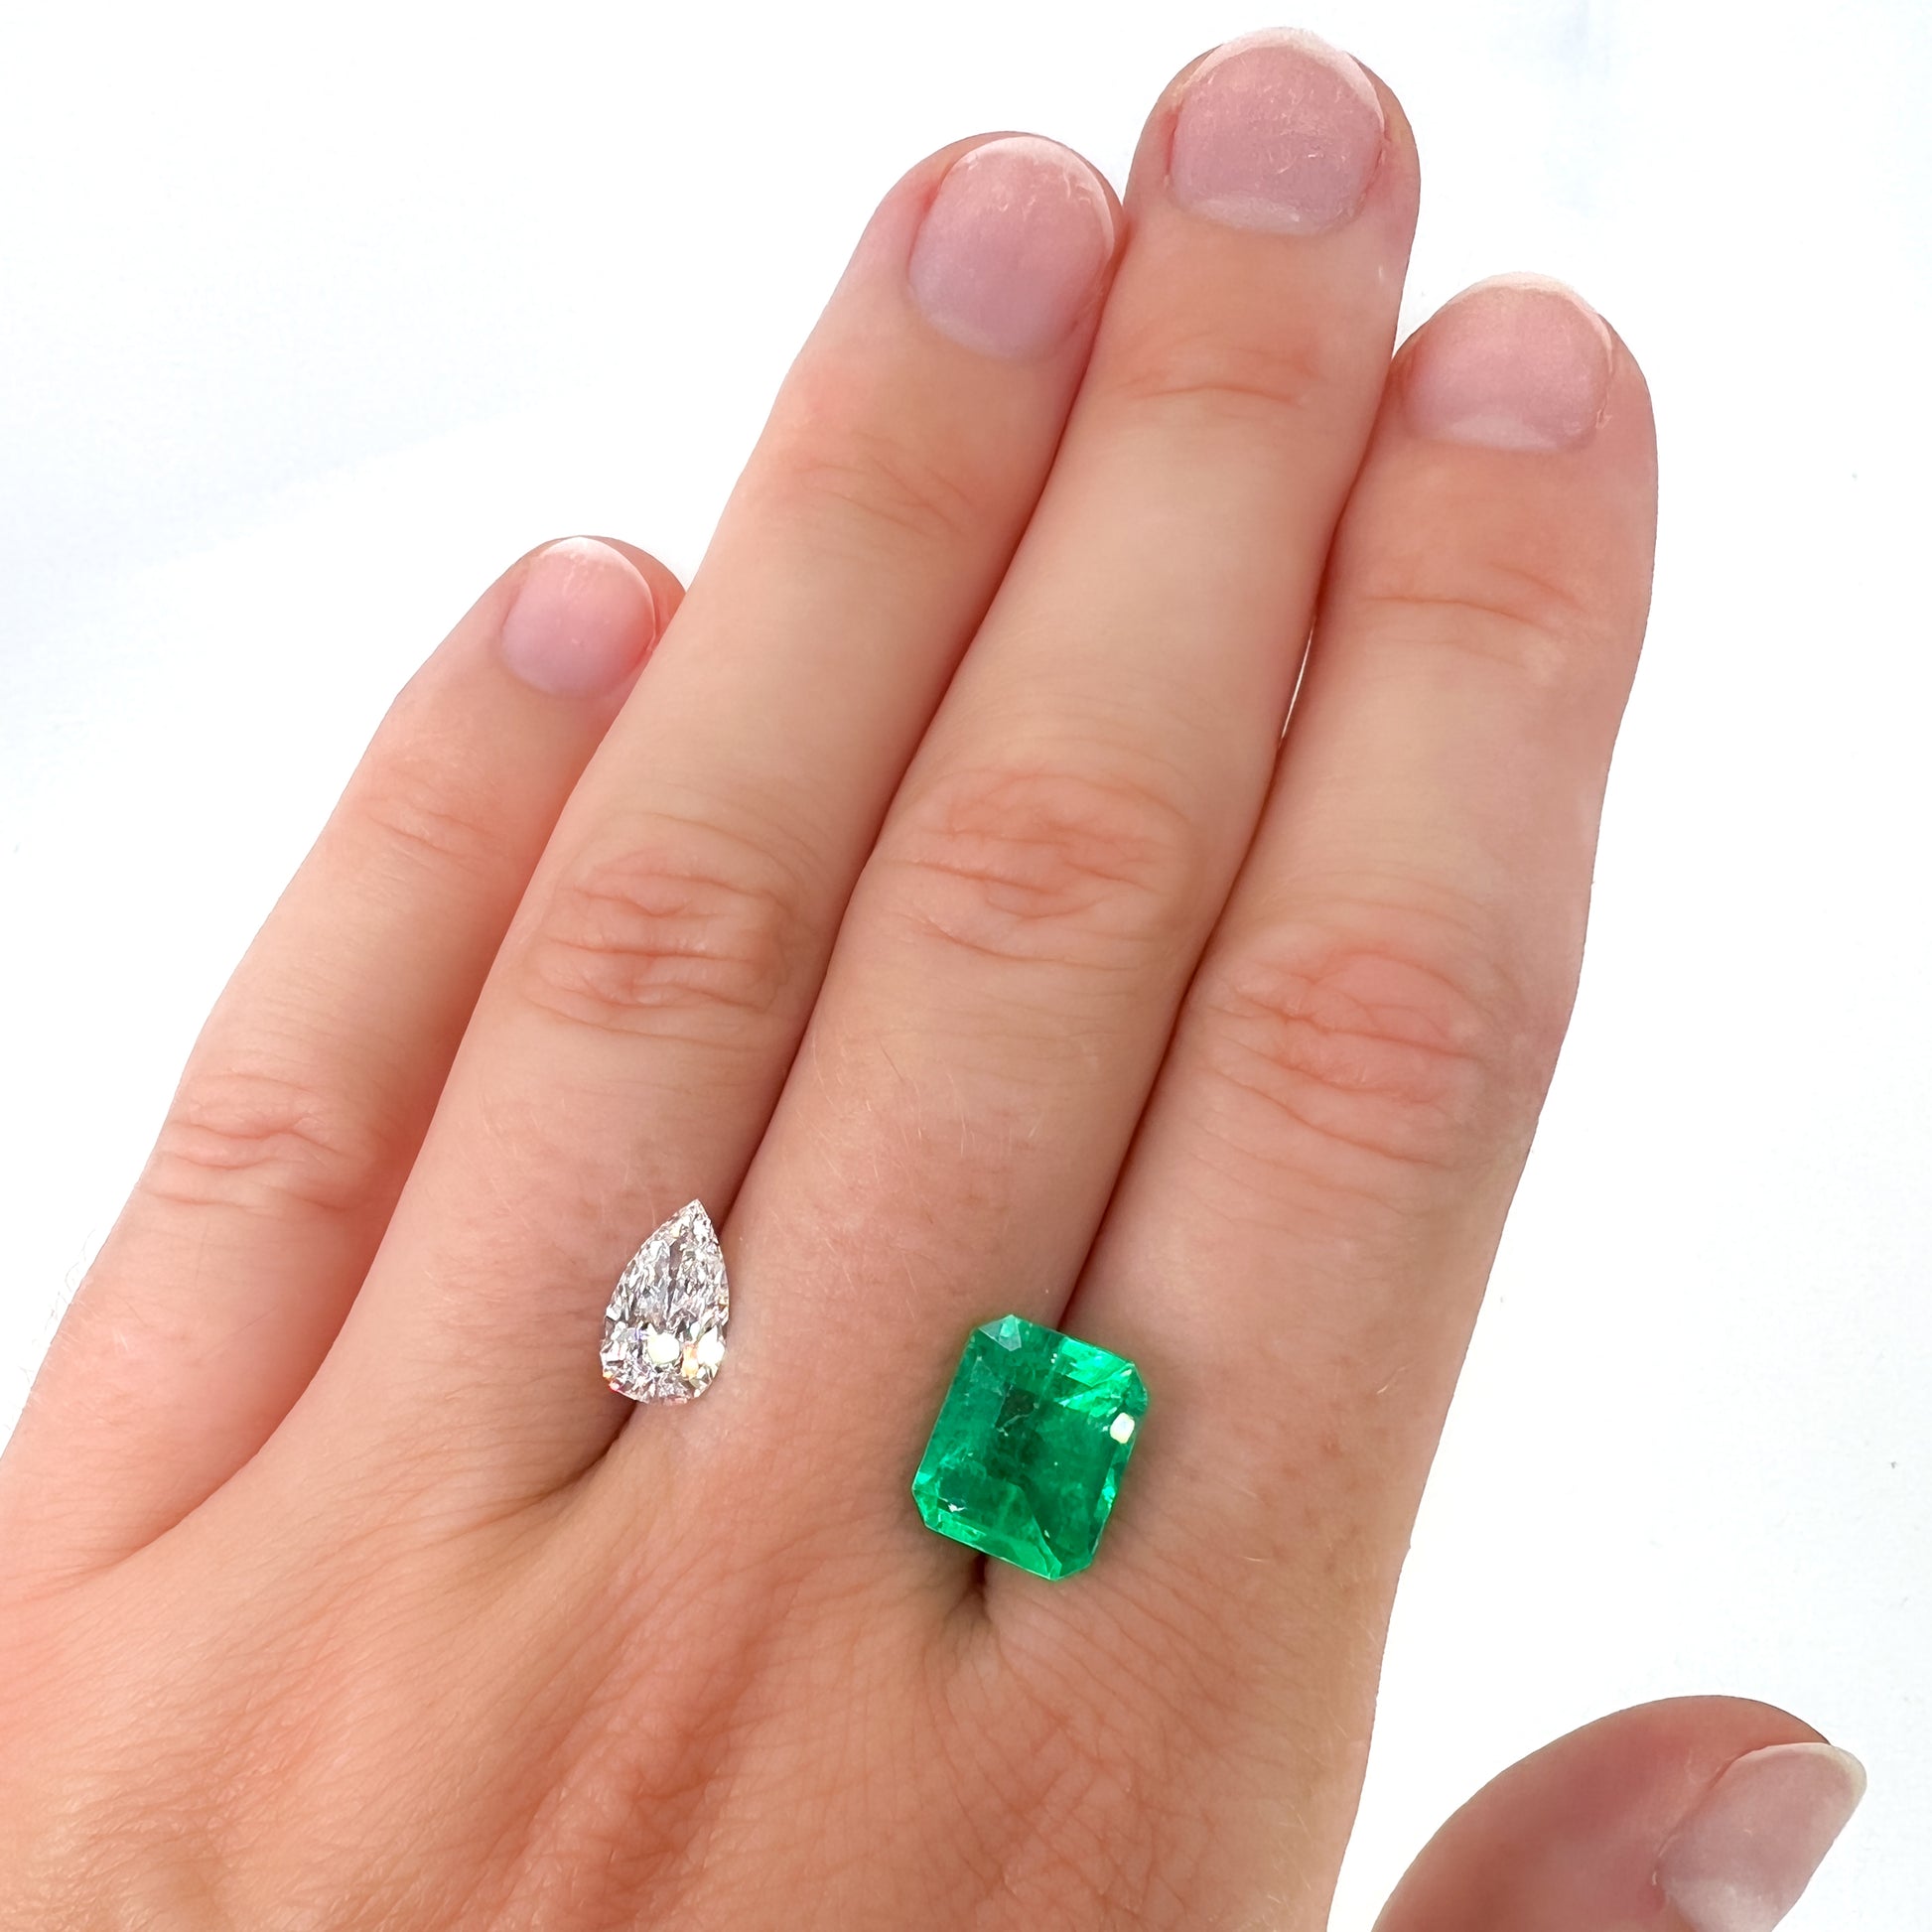 emerald and diamond ring, emerald engagement ring, emerald ring, diamond band, diamond ring, hong kong engagement ring, zambian emerald, cocktail ring, delicate emerald ring, colombian emerald ring, hong kong engagement ring, 翡翠戒指, 祖母绿戒指, 香港珠宝, 订婚戒指, 钻戒, 钻石,  古董钻石, colombian emeralds